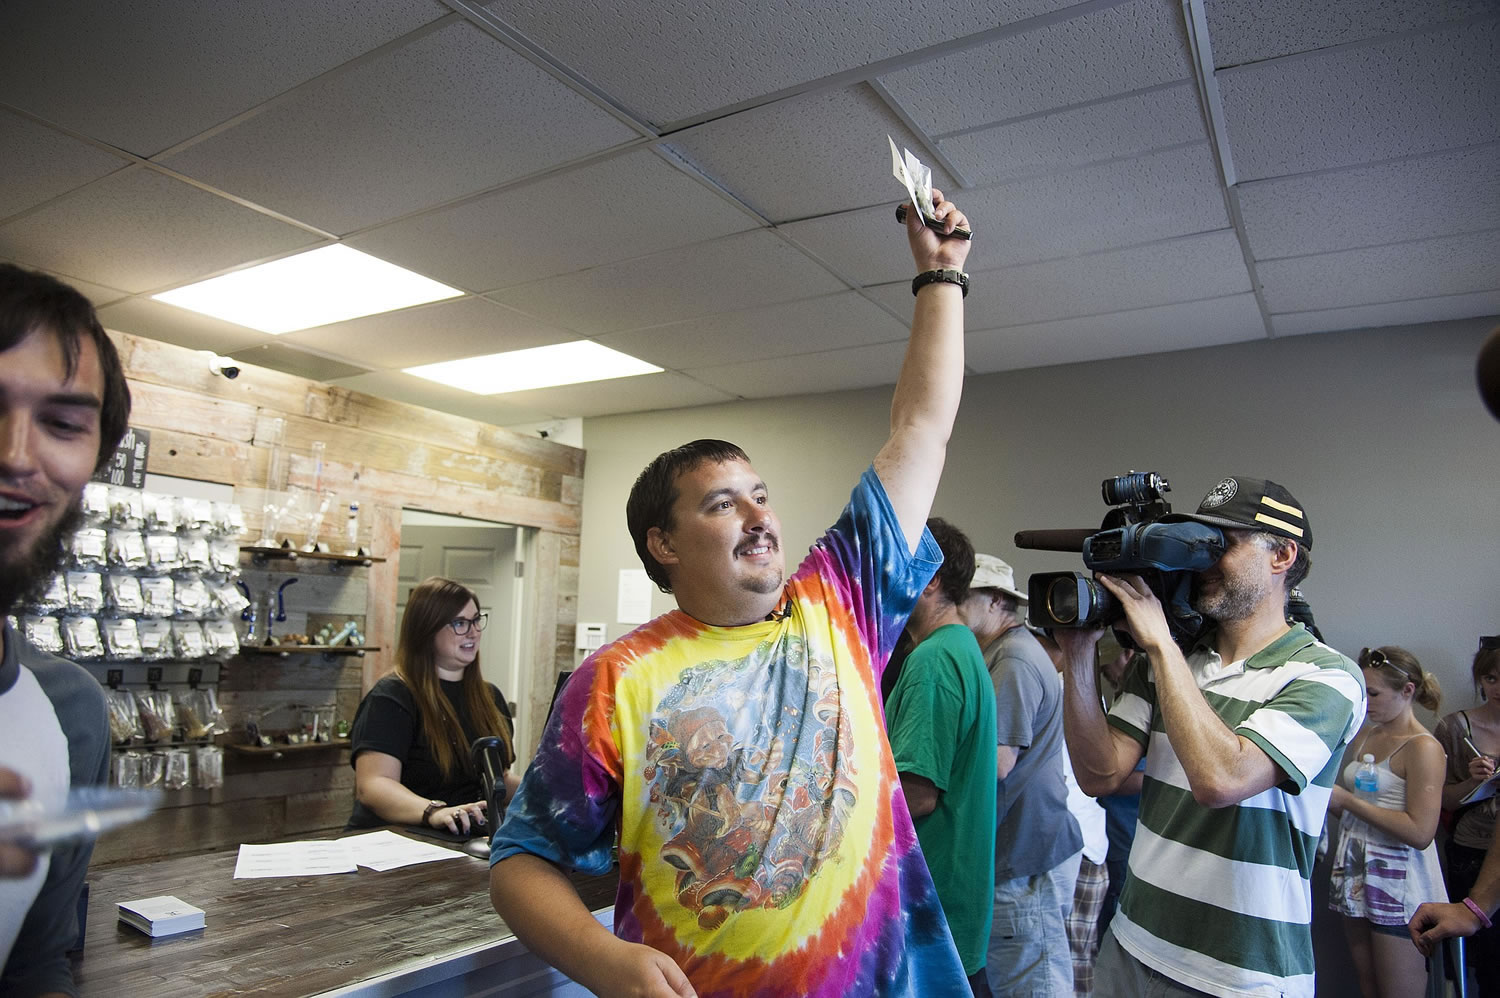 Mike Boyd shows off the marijuana he bought after being the first in line to legally purchase it at Spokane Green Leaf on July 8 in Spokane.